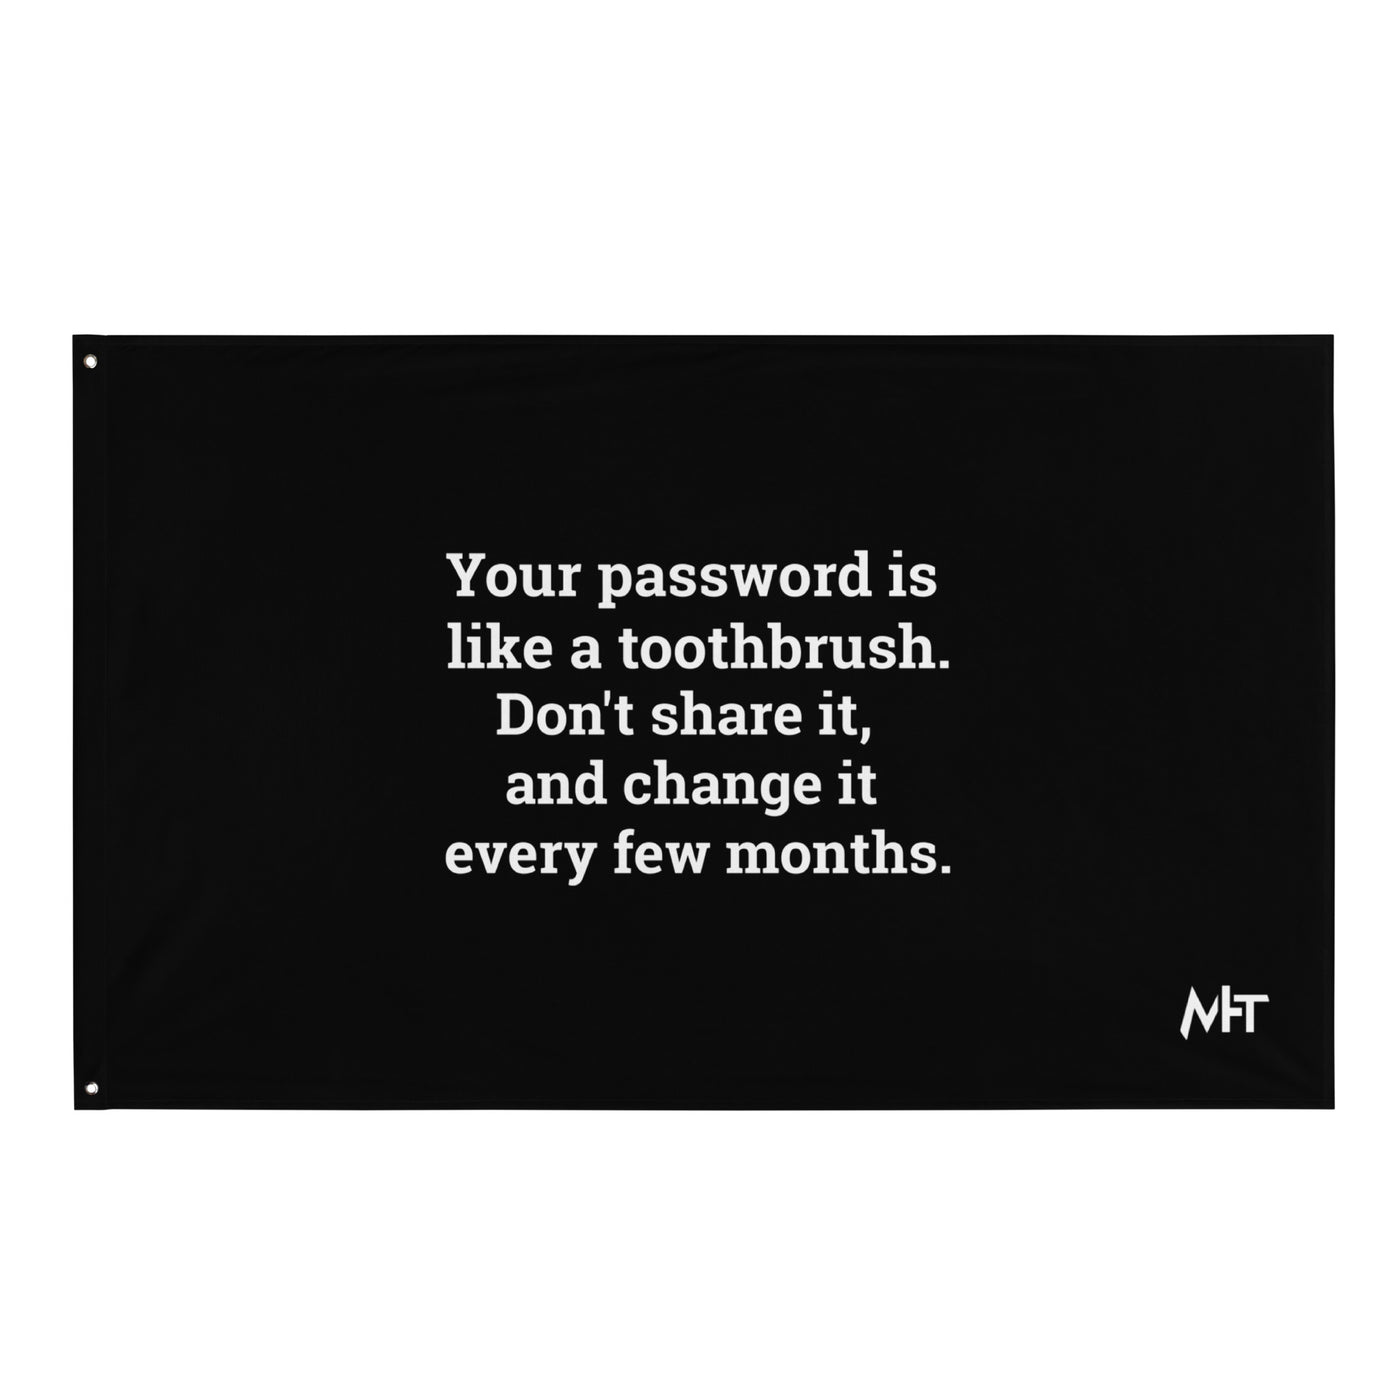 Your password is like a toothbrush V3 - Flag